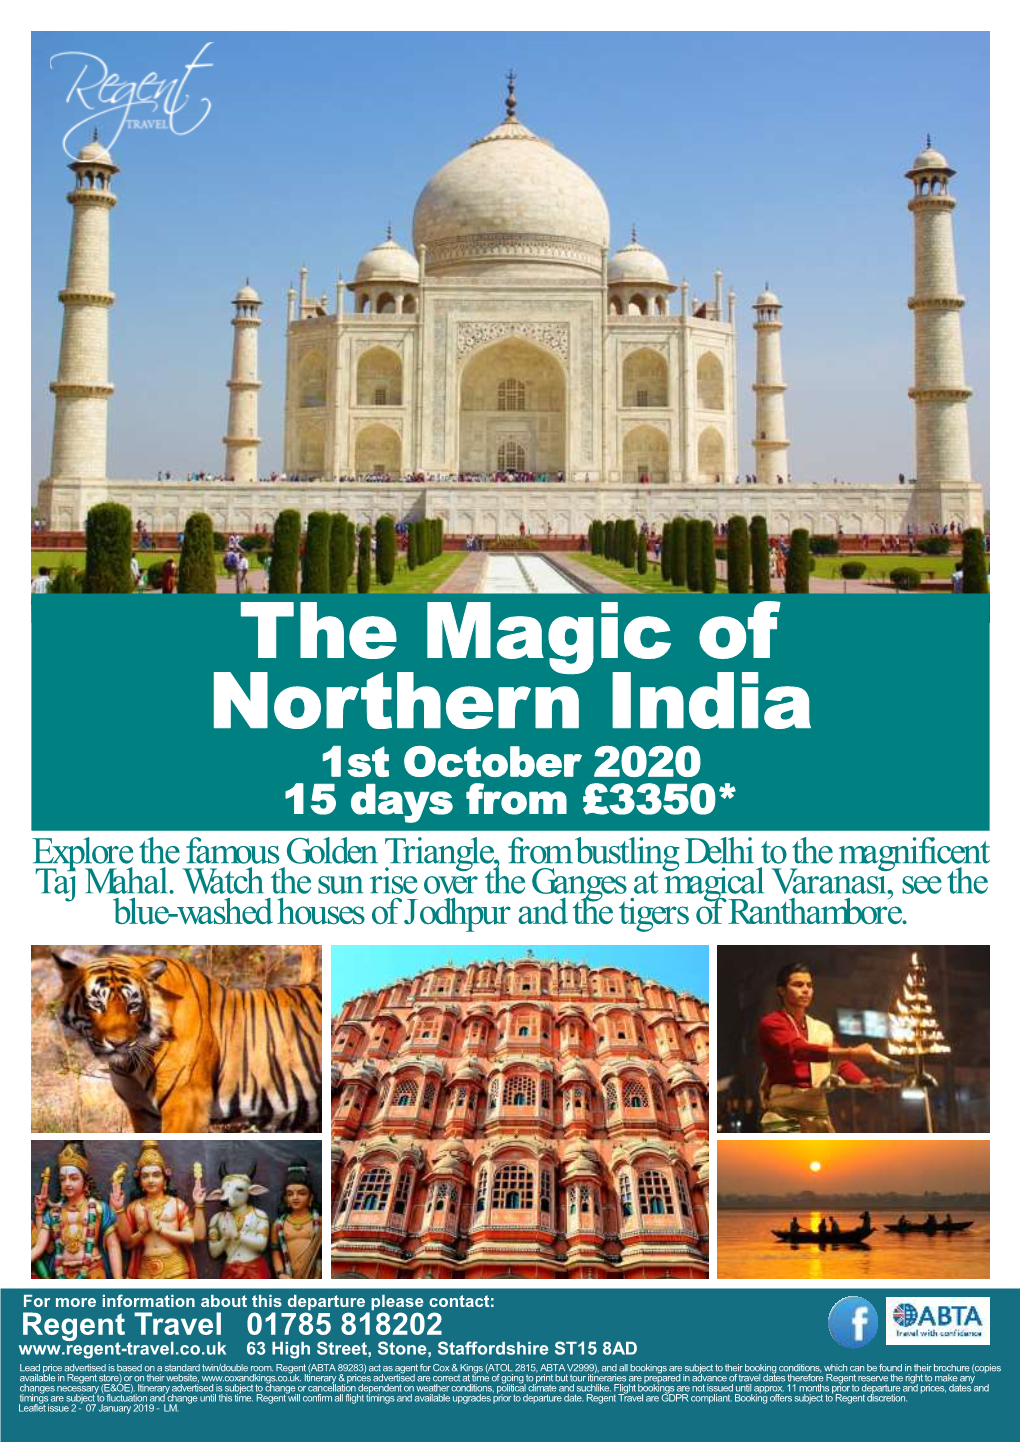 The Magic of Northern India